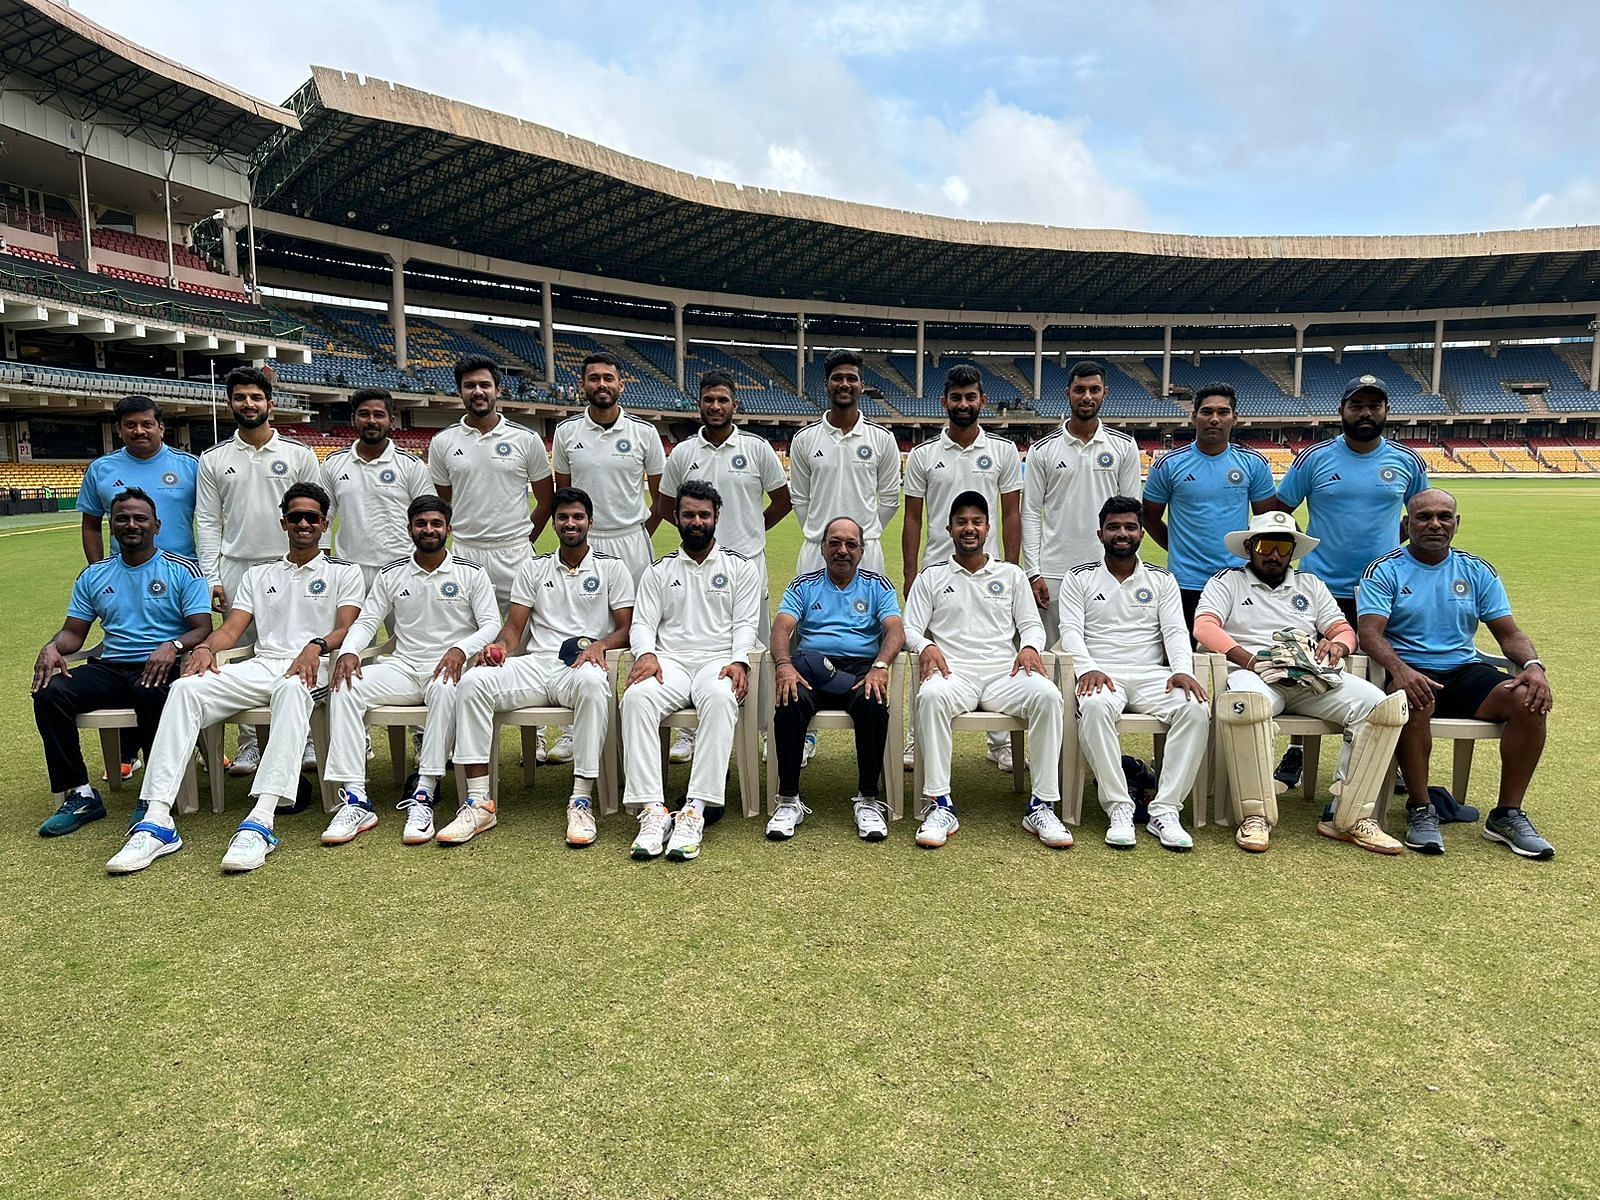 South Zone clinched the Duleep Trophy, with their semifinal clash against North Zone standing out